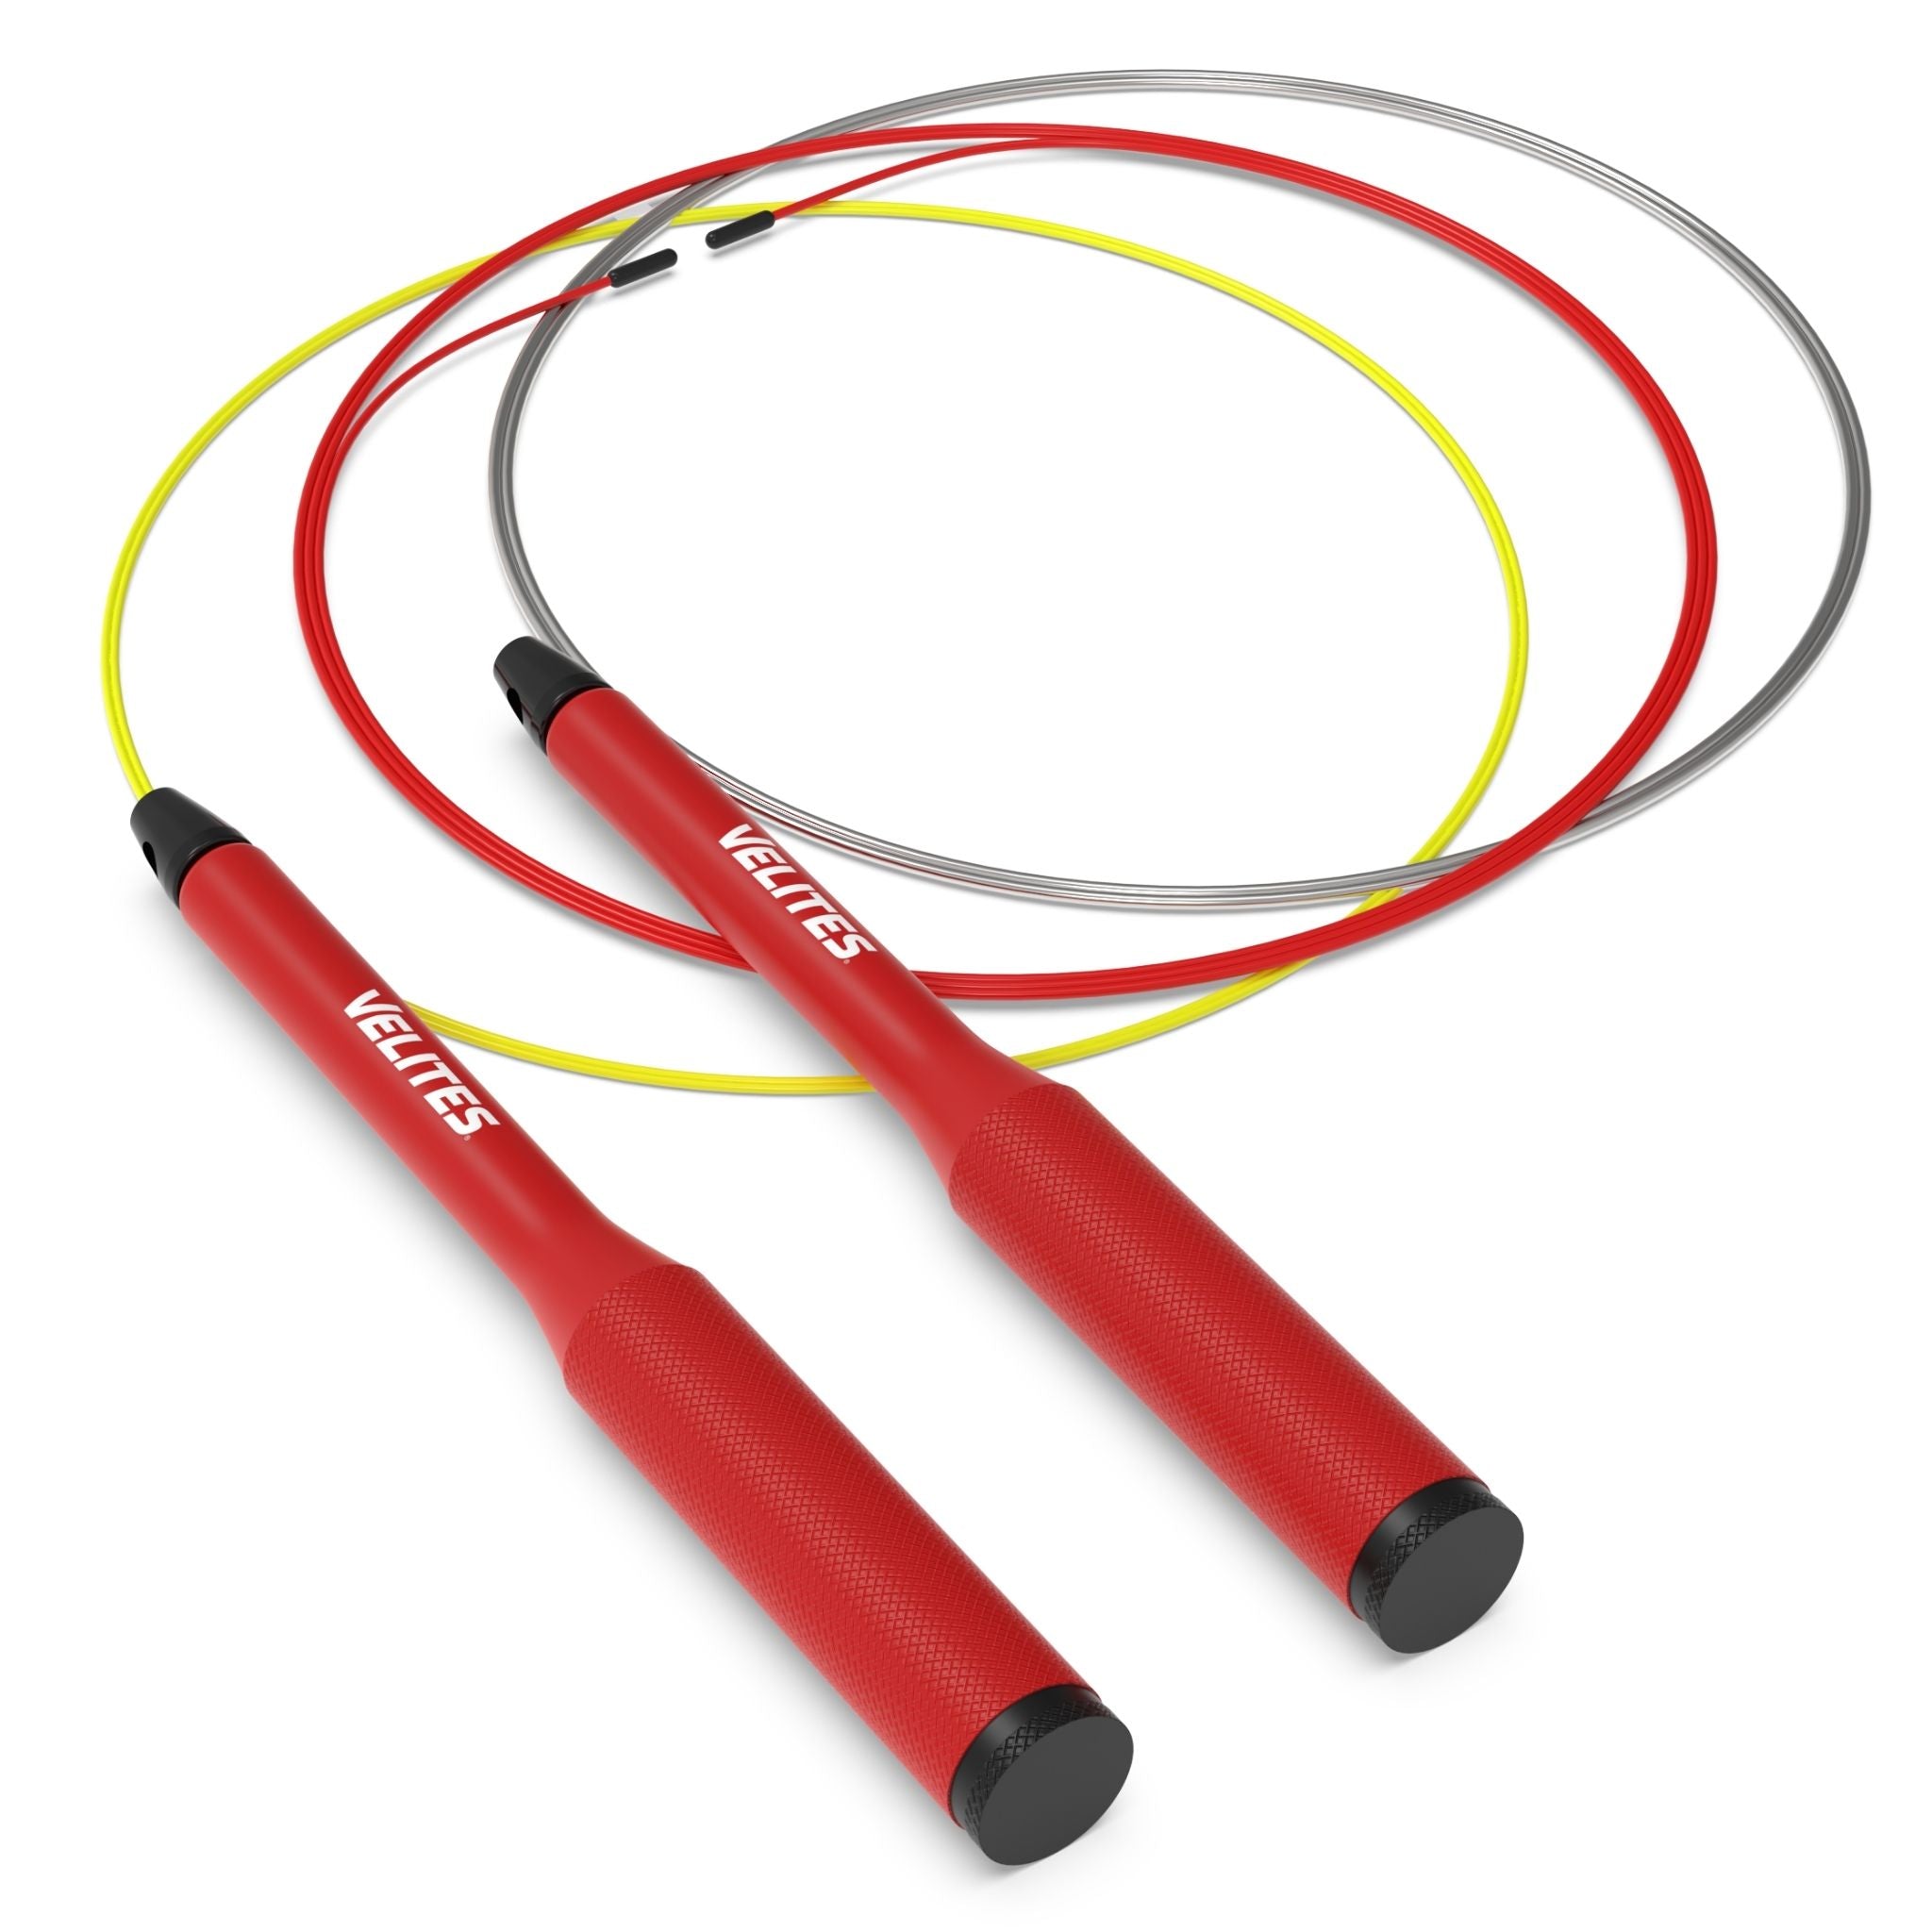 Pack Comba Fire 2.0 Velites + Cables - rojo - 